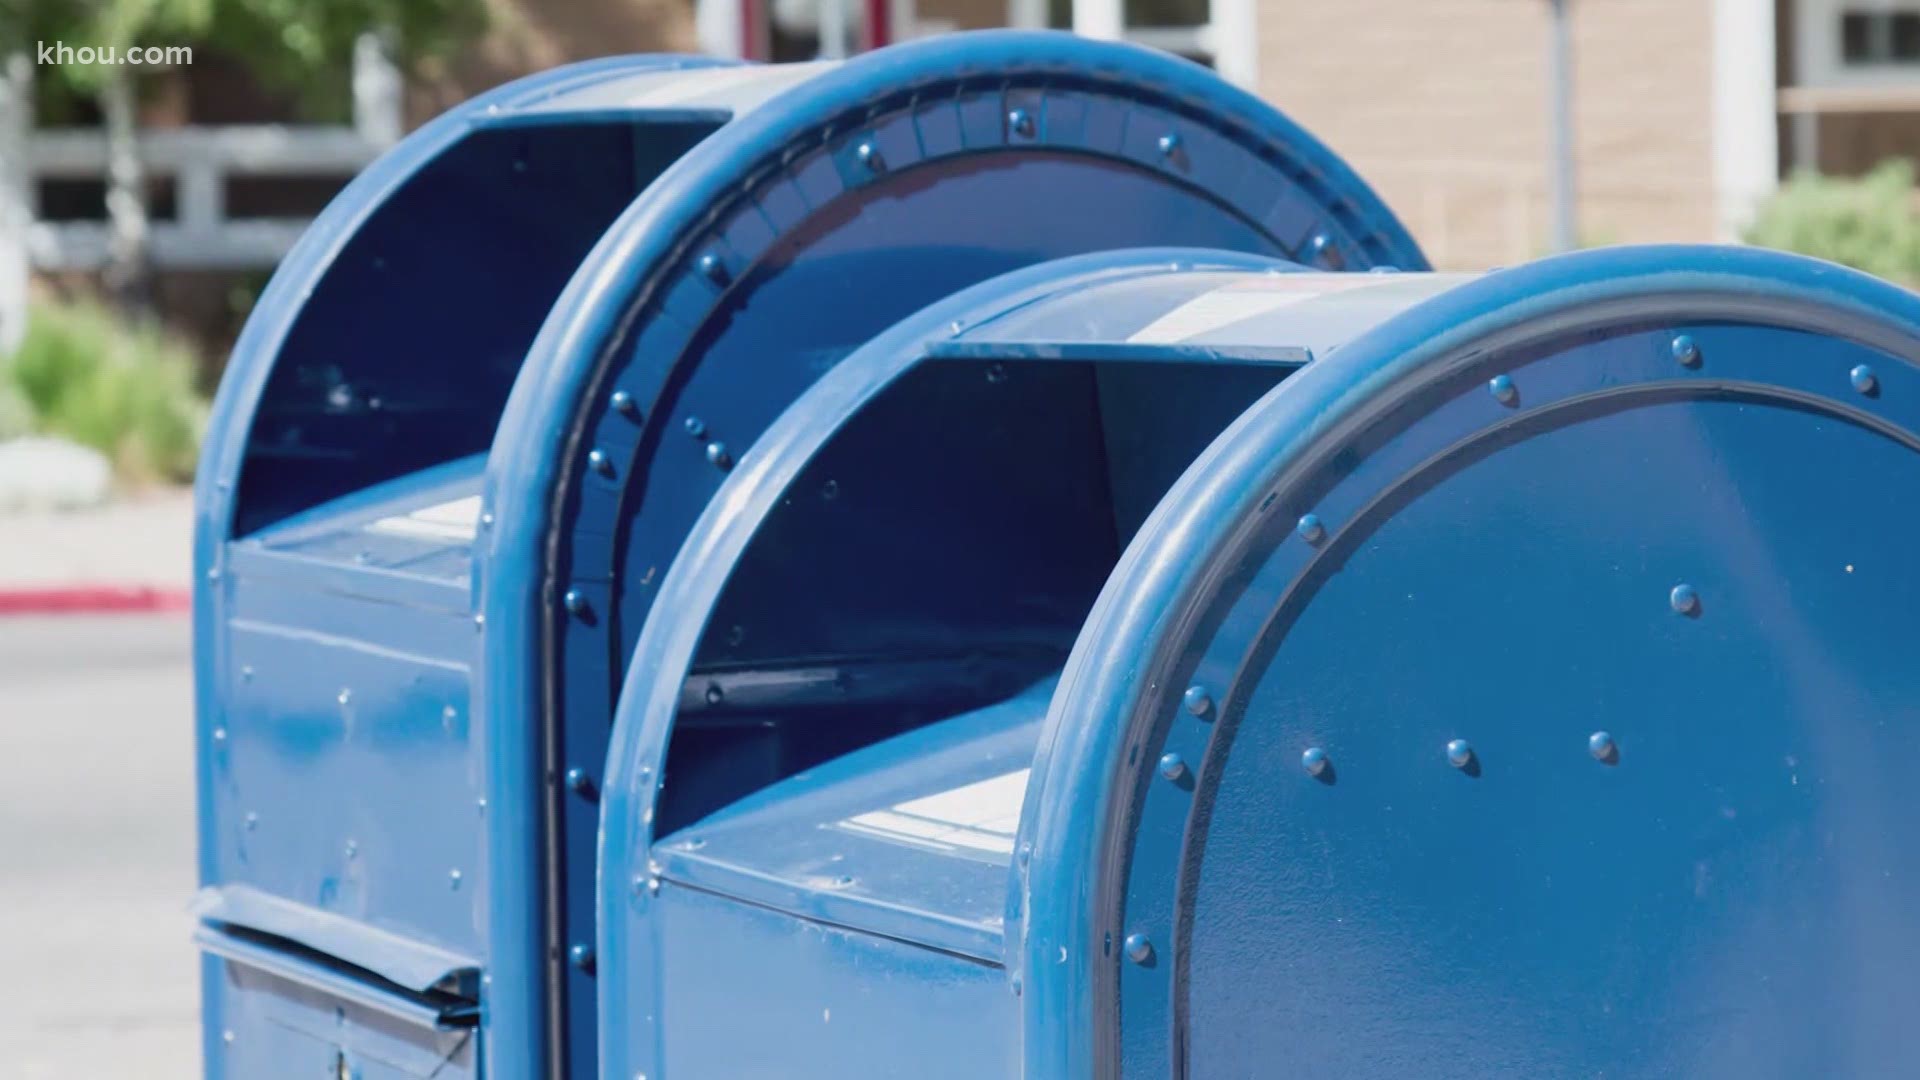 The Harris County District Attorney's Office says armed robbers are holding up USPS letter carriers during daily mail routes, looking to steal their mailbox keys.